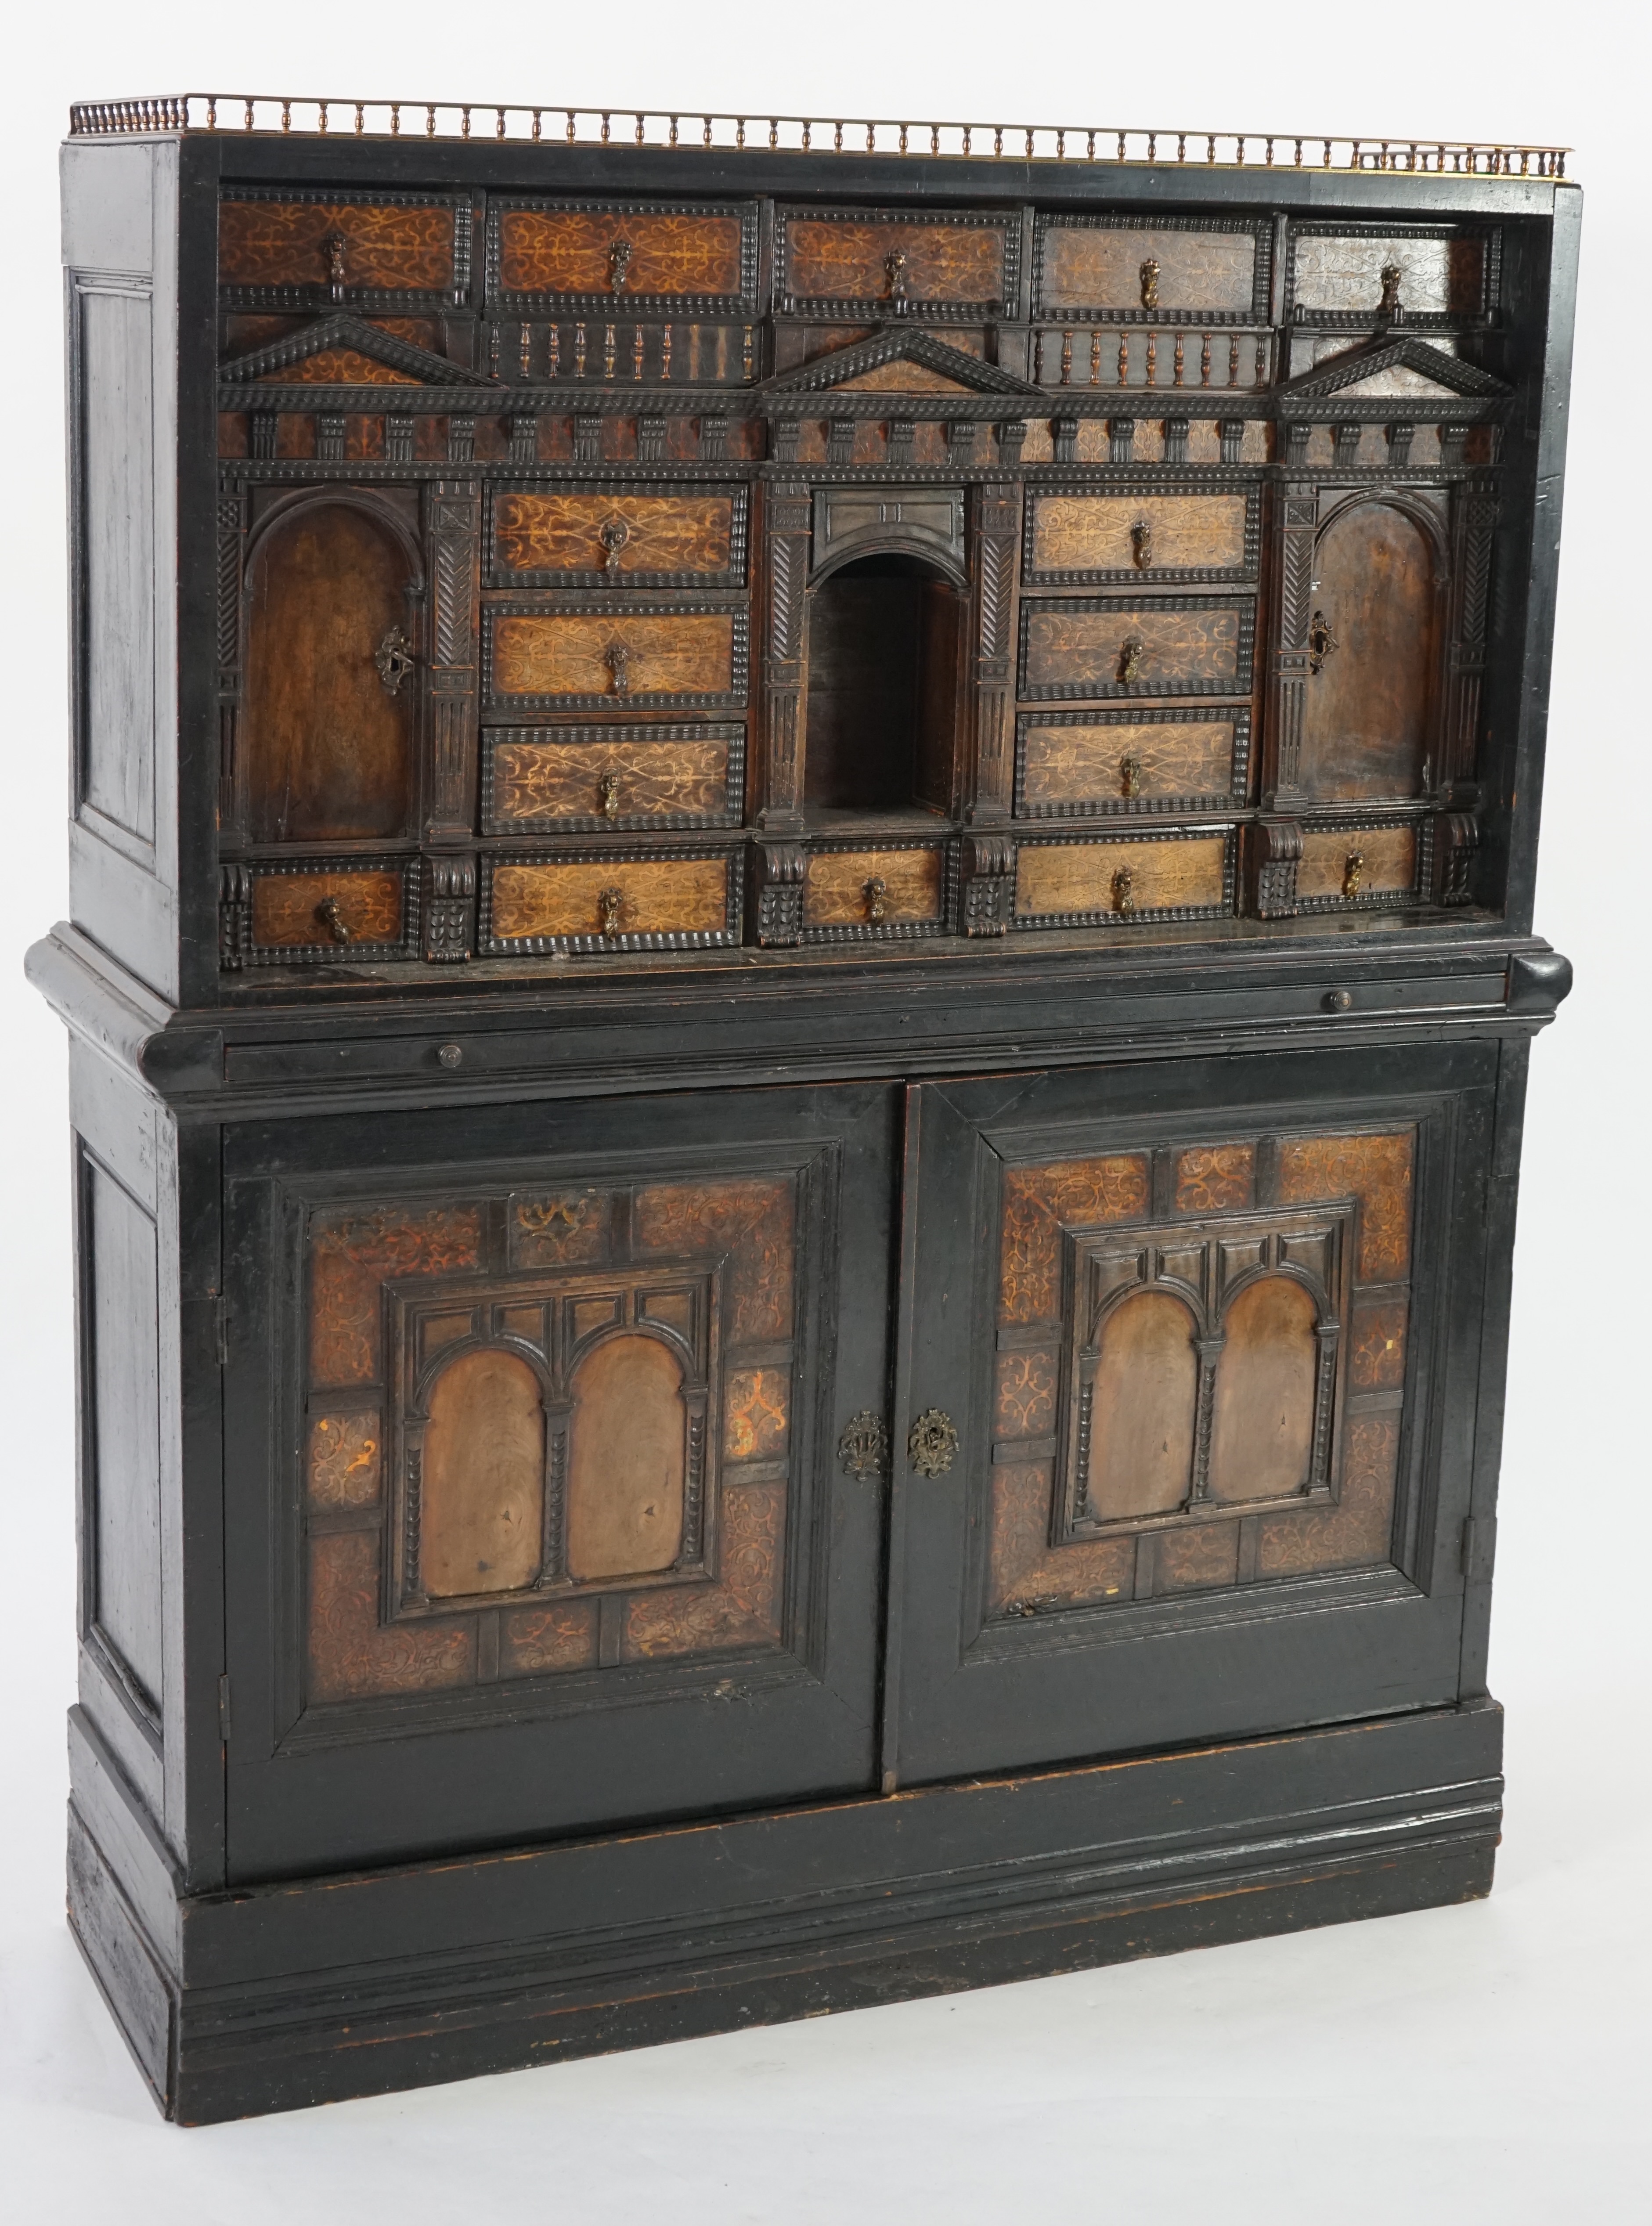 An 18th century and later Dutch walnut ebonised and marquetry inlaid collector's cabinet on stand